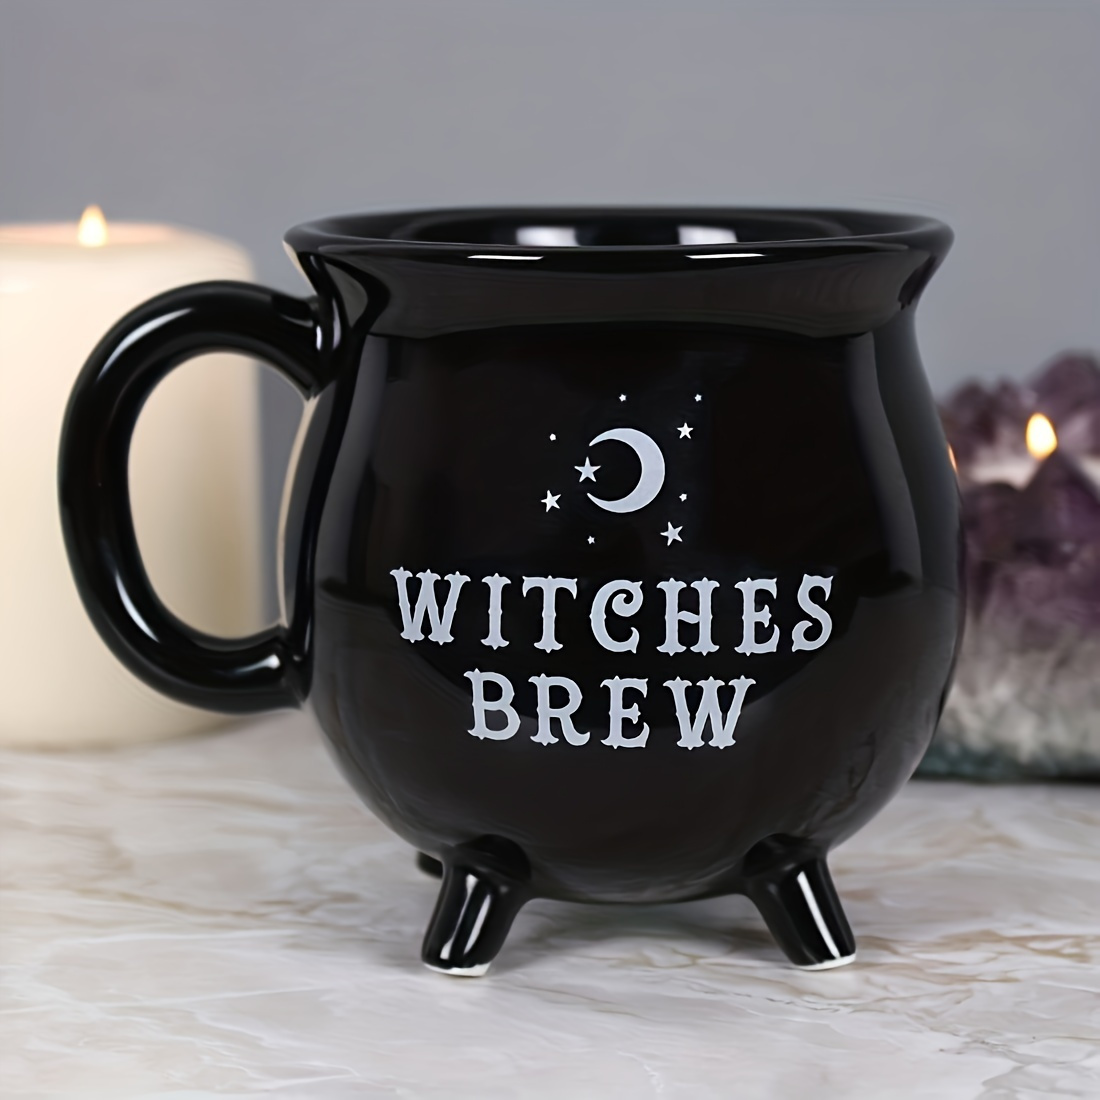 

1pc, Cauldron Ceramic Mug, 12 Oz Black Witches Brew Pattern Mug Ceramic Spooky Witch Coffee Cup Halloween Birthday Witchy Tabletop Drinkware Gifts For Adults Women